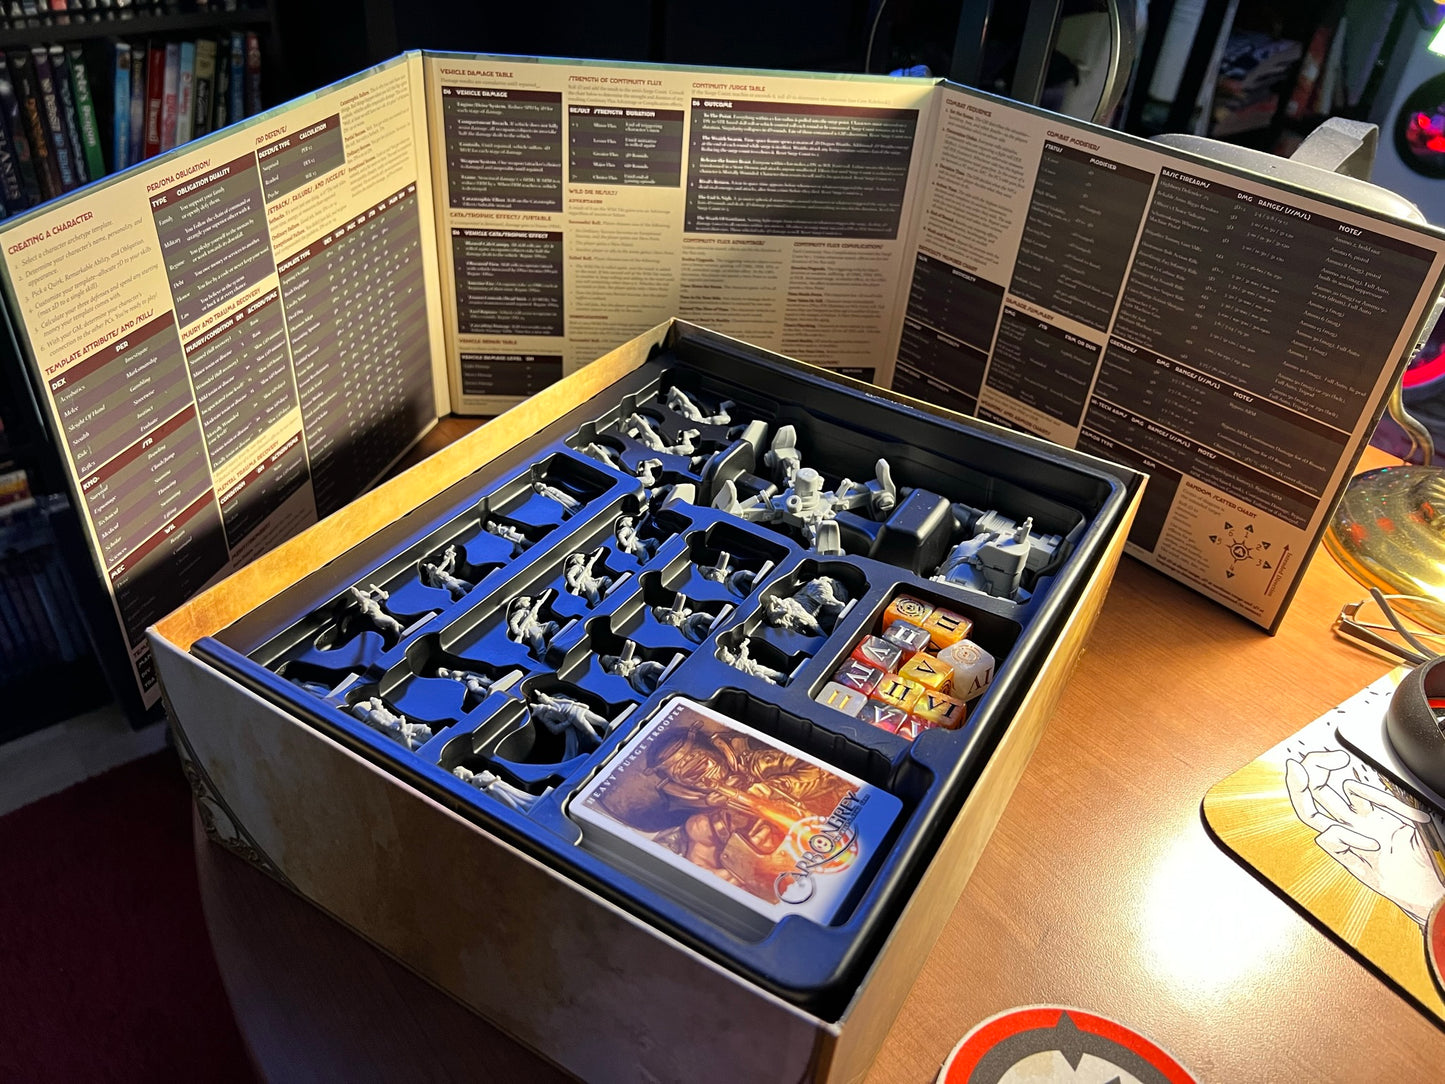 Open Carbon Grey RPG Deluxe Boxed Set